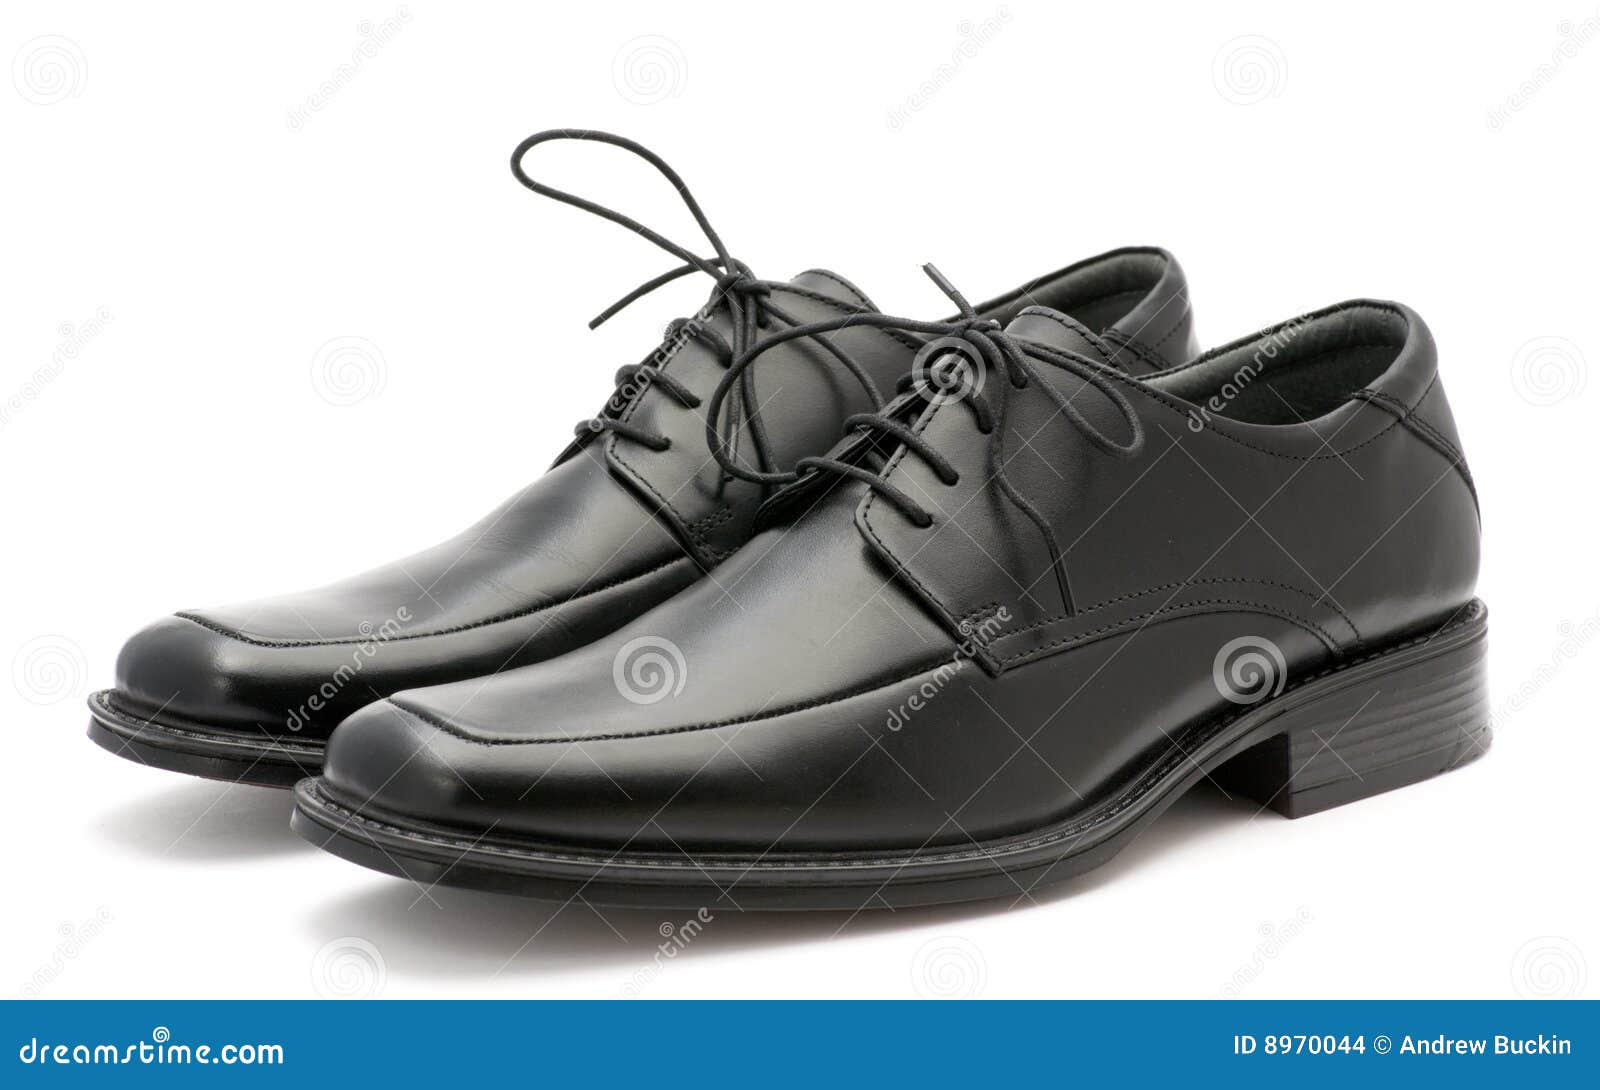 Business shoes stock photo. Image of white, shiny, comfort - 8970044